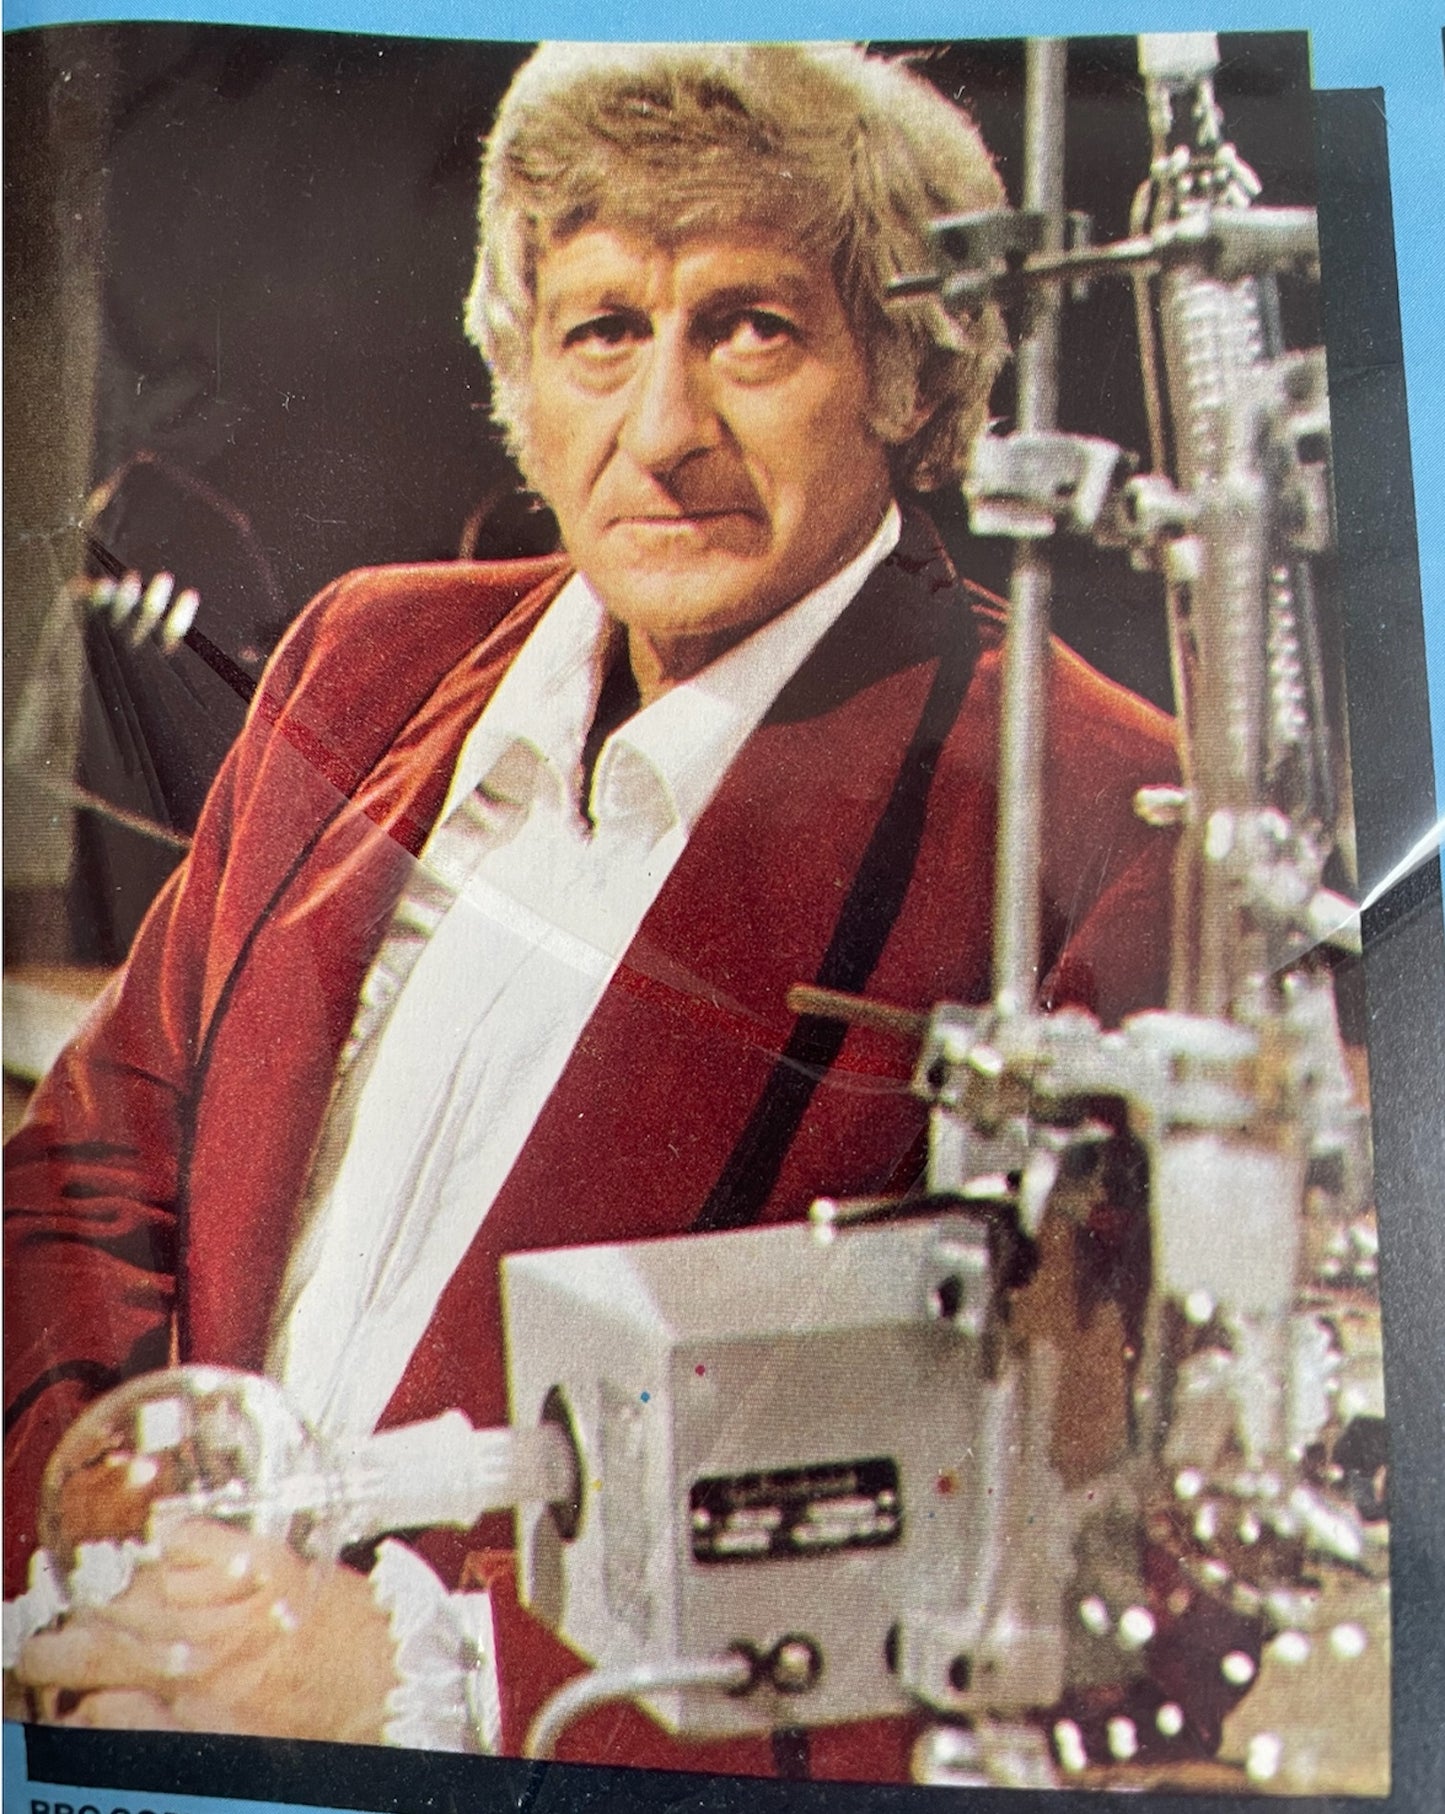 Vintage 1972 Dr Doctor Who Pleasure Products 100 Piece Jigsaw Puzzle Number 2, Doctor Who (Jon Pertwee) At Work - Factory Sealed Shop Stock Room Find